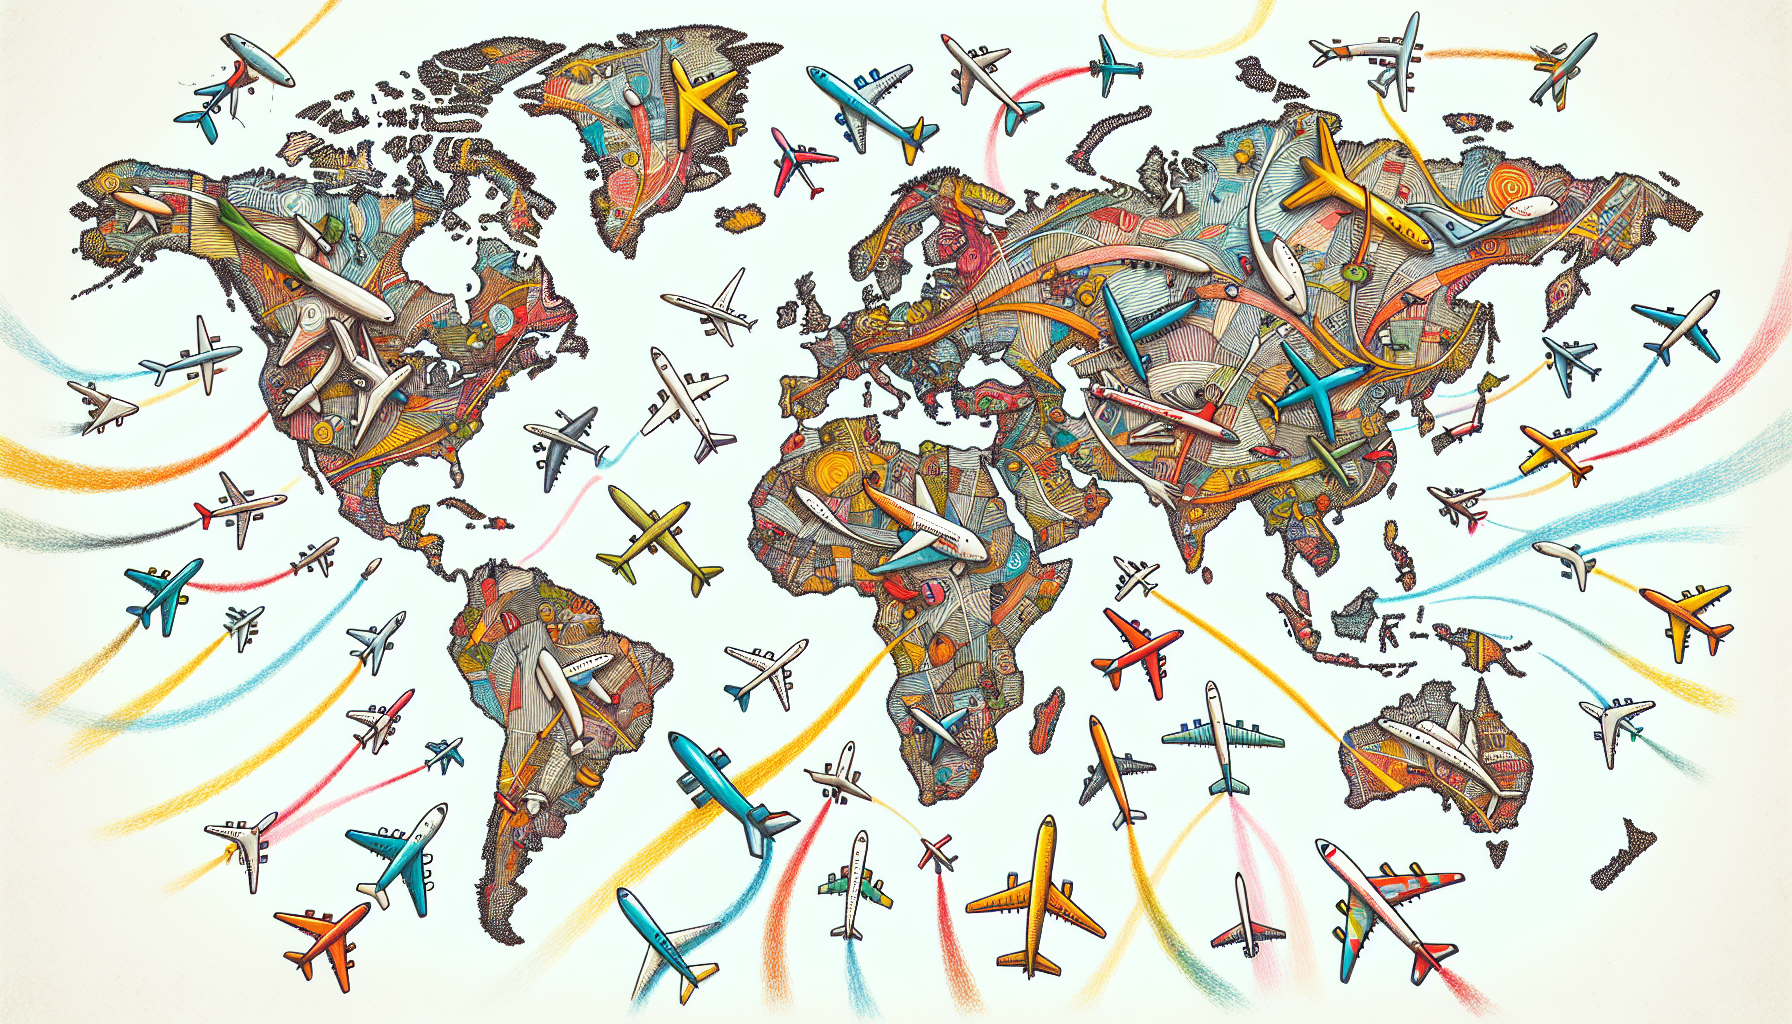 A colorful and whimsical illustration of a world map with airplanes flying around it